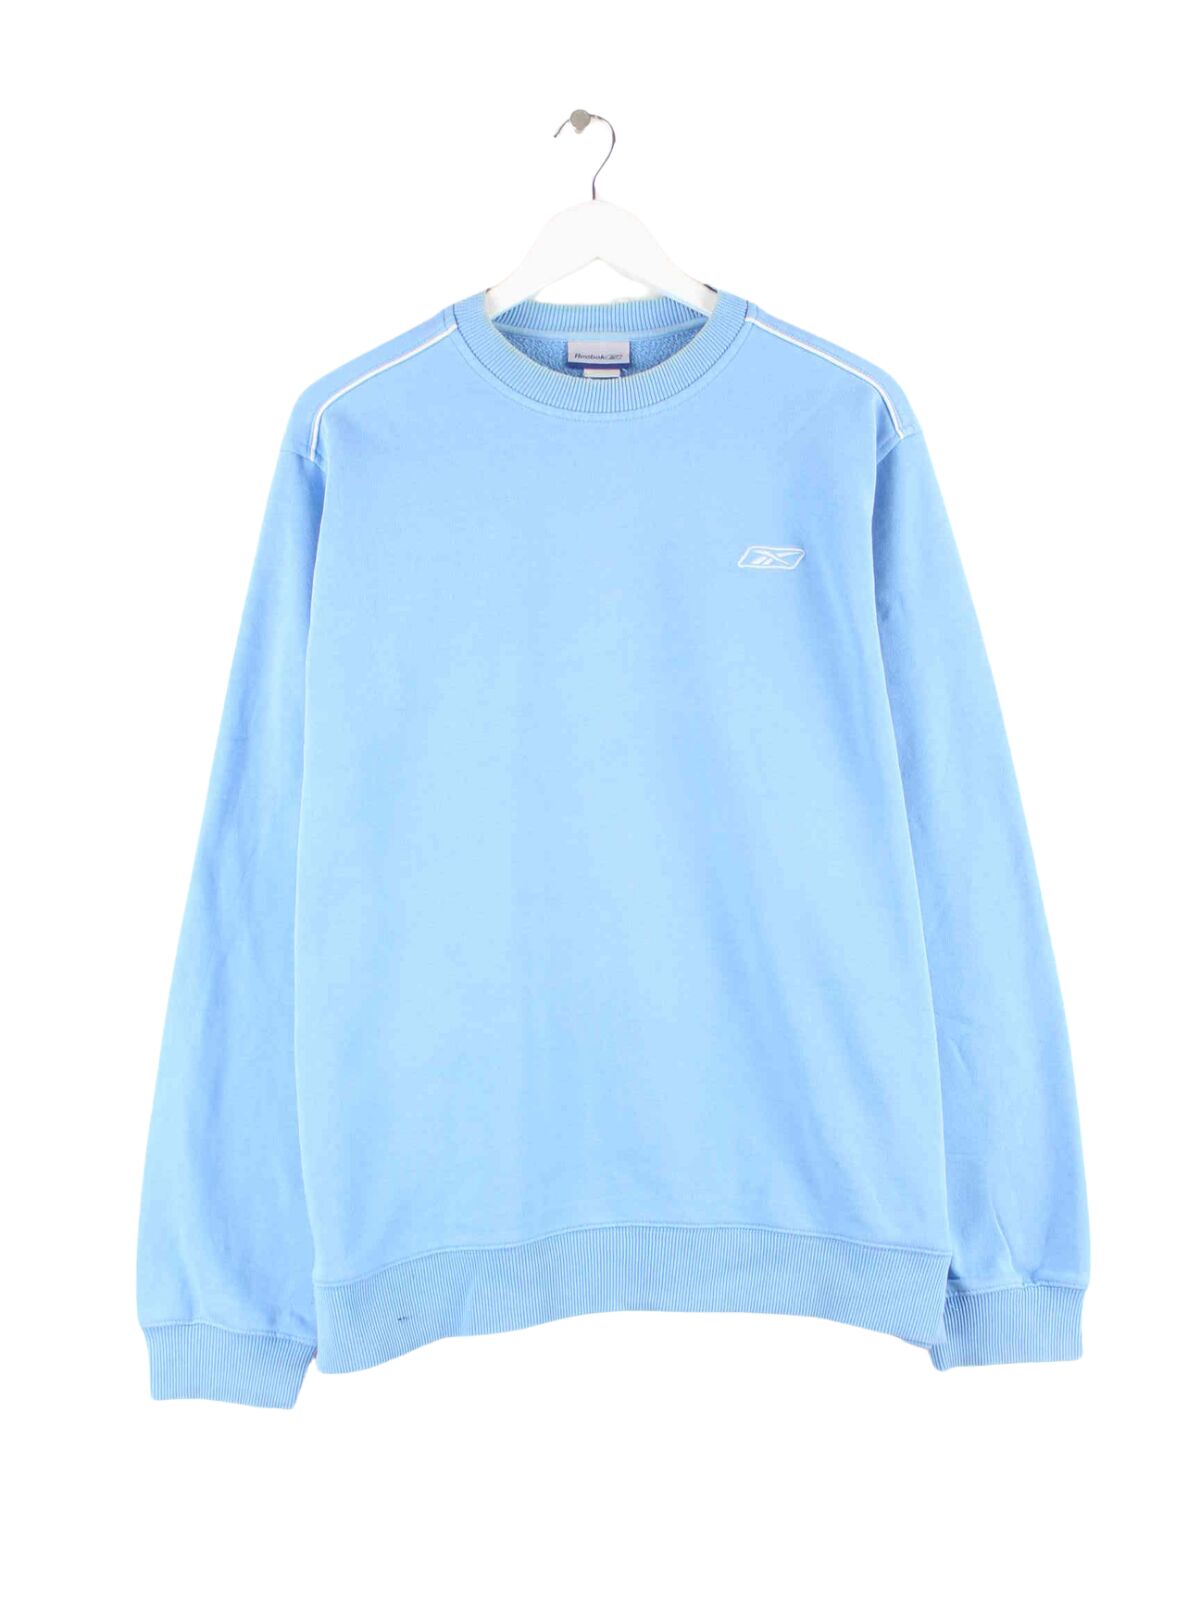 Reebok 00s Embroidered Sweater Blau M (front image)